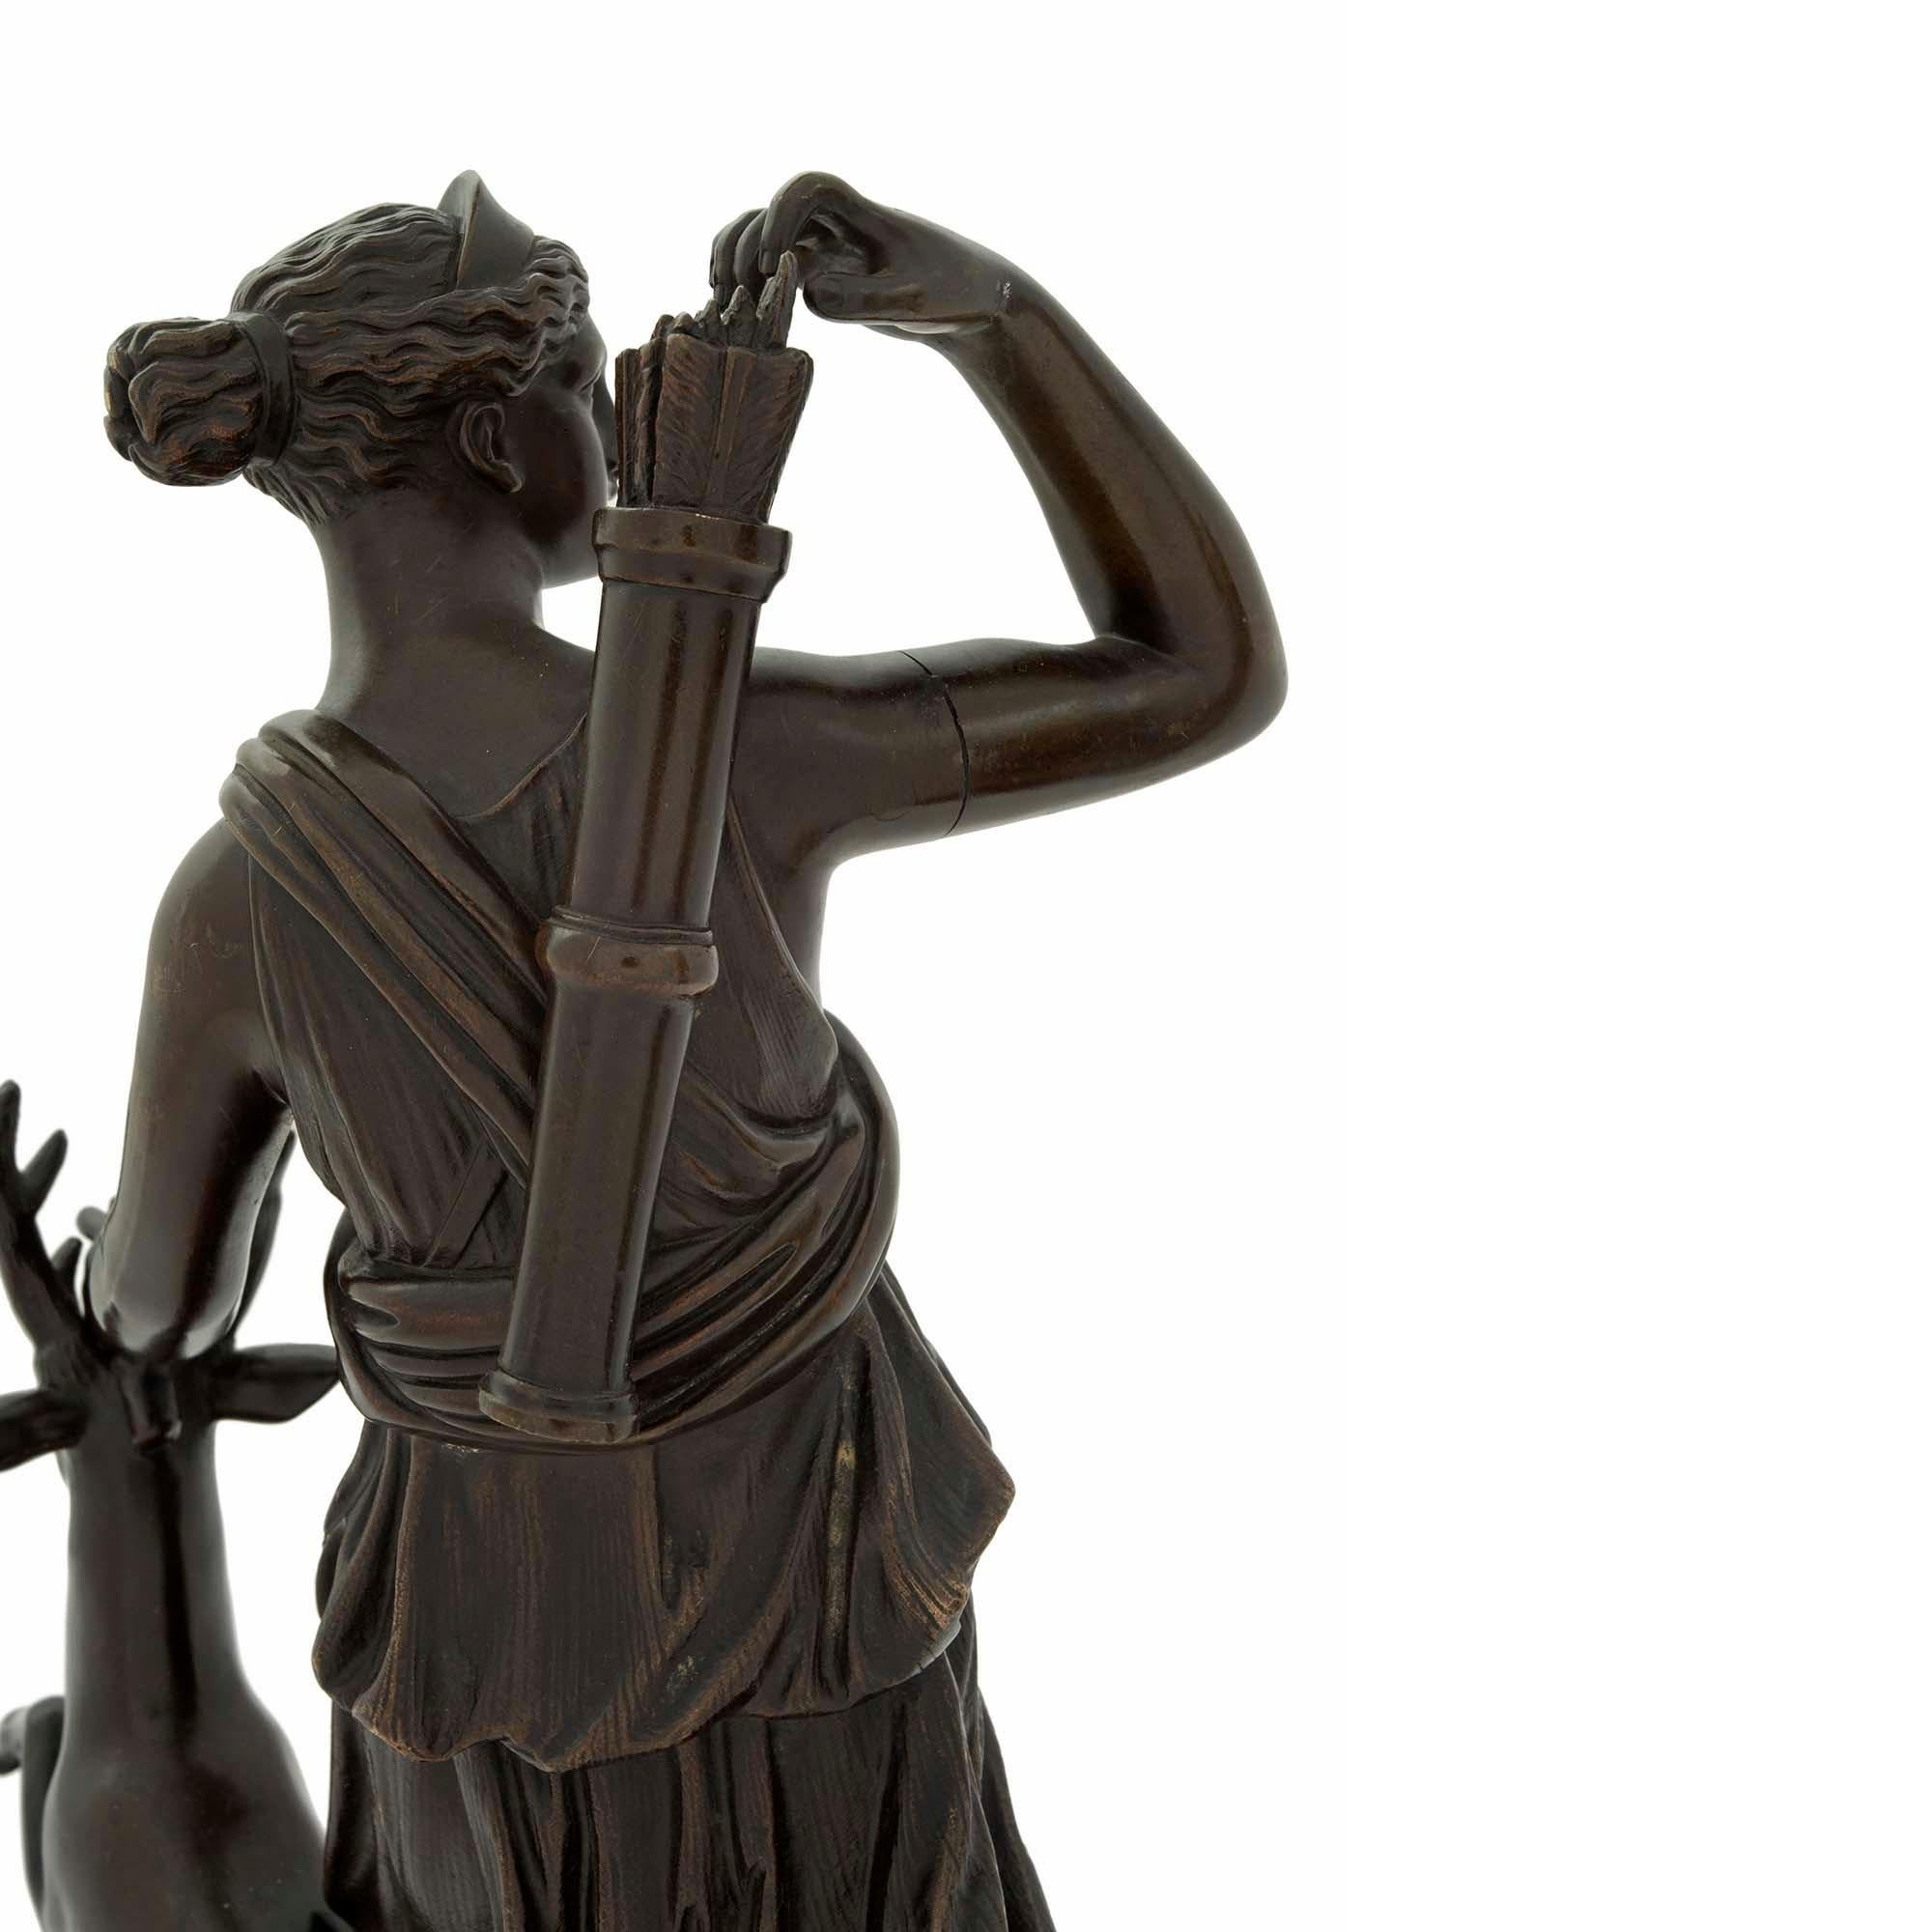 Louis XVI French 19th Century Patinated Bronze and Ormolu Statue of Diana the Huntress For Sale